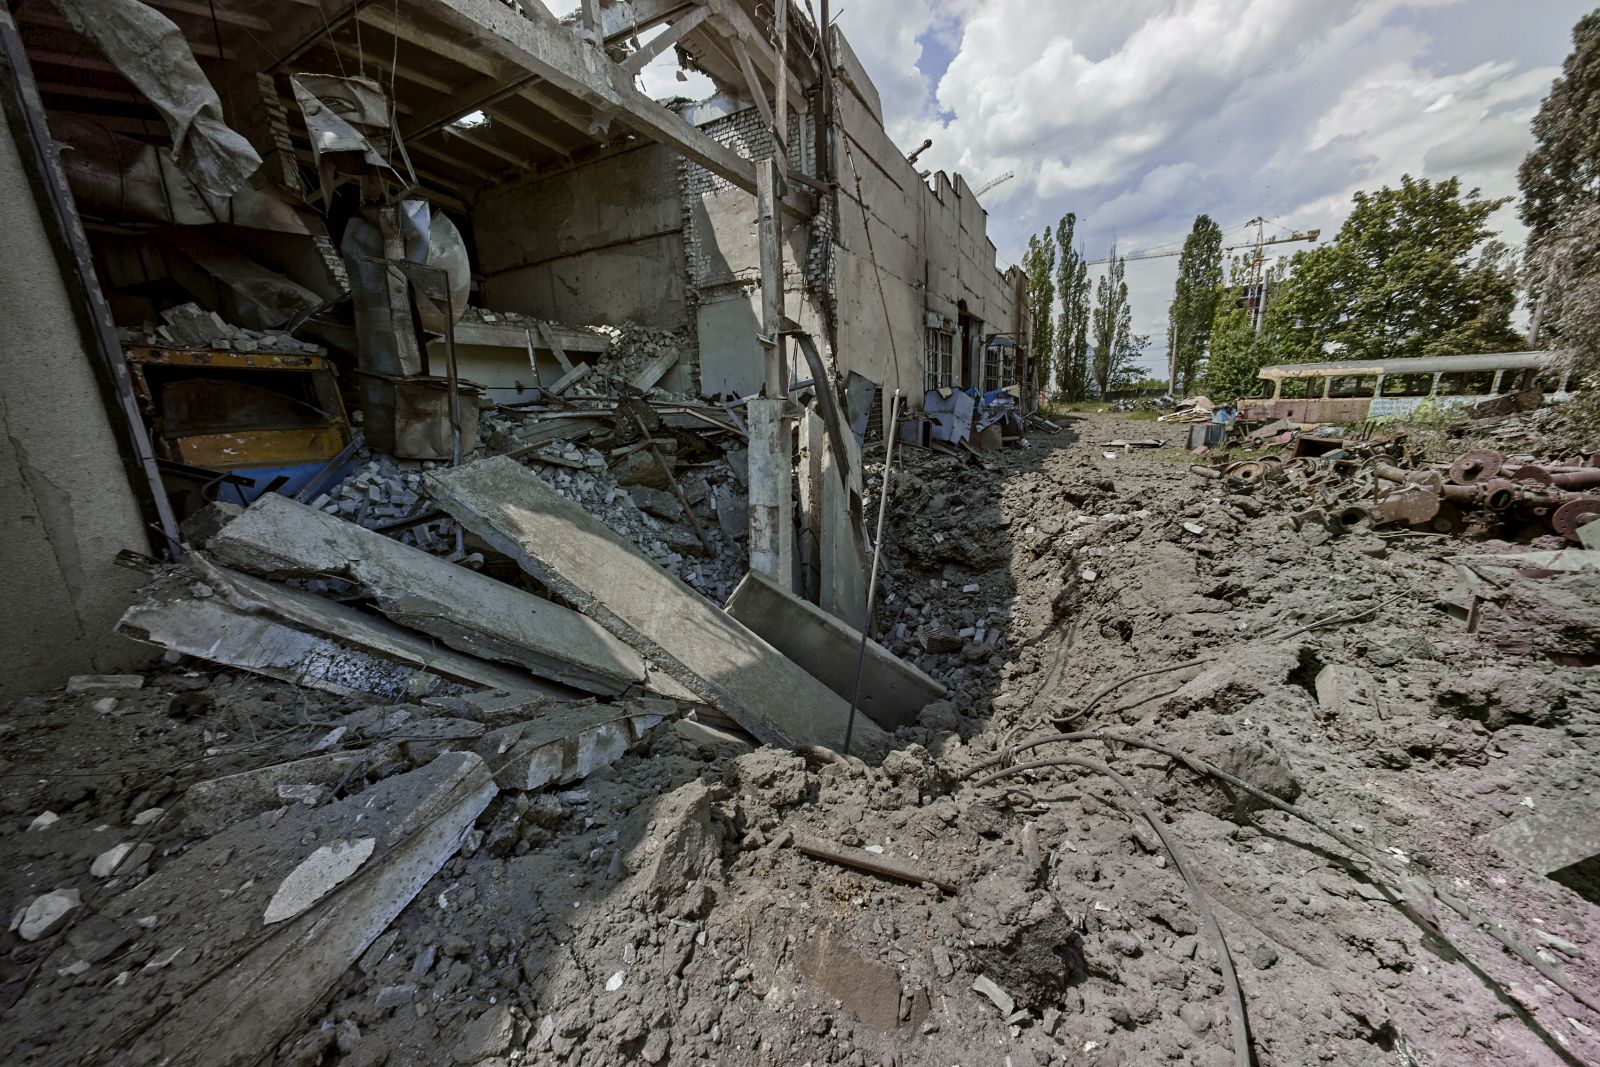 epa10020771 A destroyed tramway depot after recently shelling in Kharkiv, Ukraine, 18 June 2022. Kharkiv, Ukraine's second-largest city, and its surroundings were a center of heavy fightings before the Ukrainian army recaptured the area. On 24 February Russian troops had invaded Ukraine starting a conflict that brought death and destruction and a humanitarian crisis to the country.  EPA/SERGEY KOZLOV